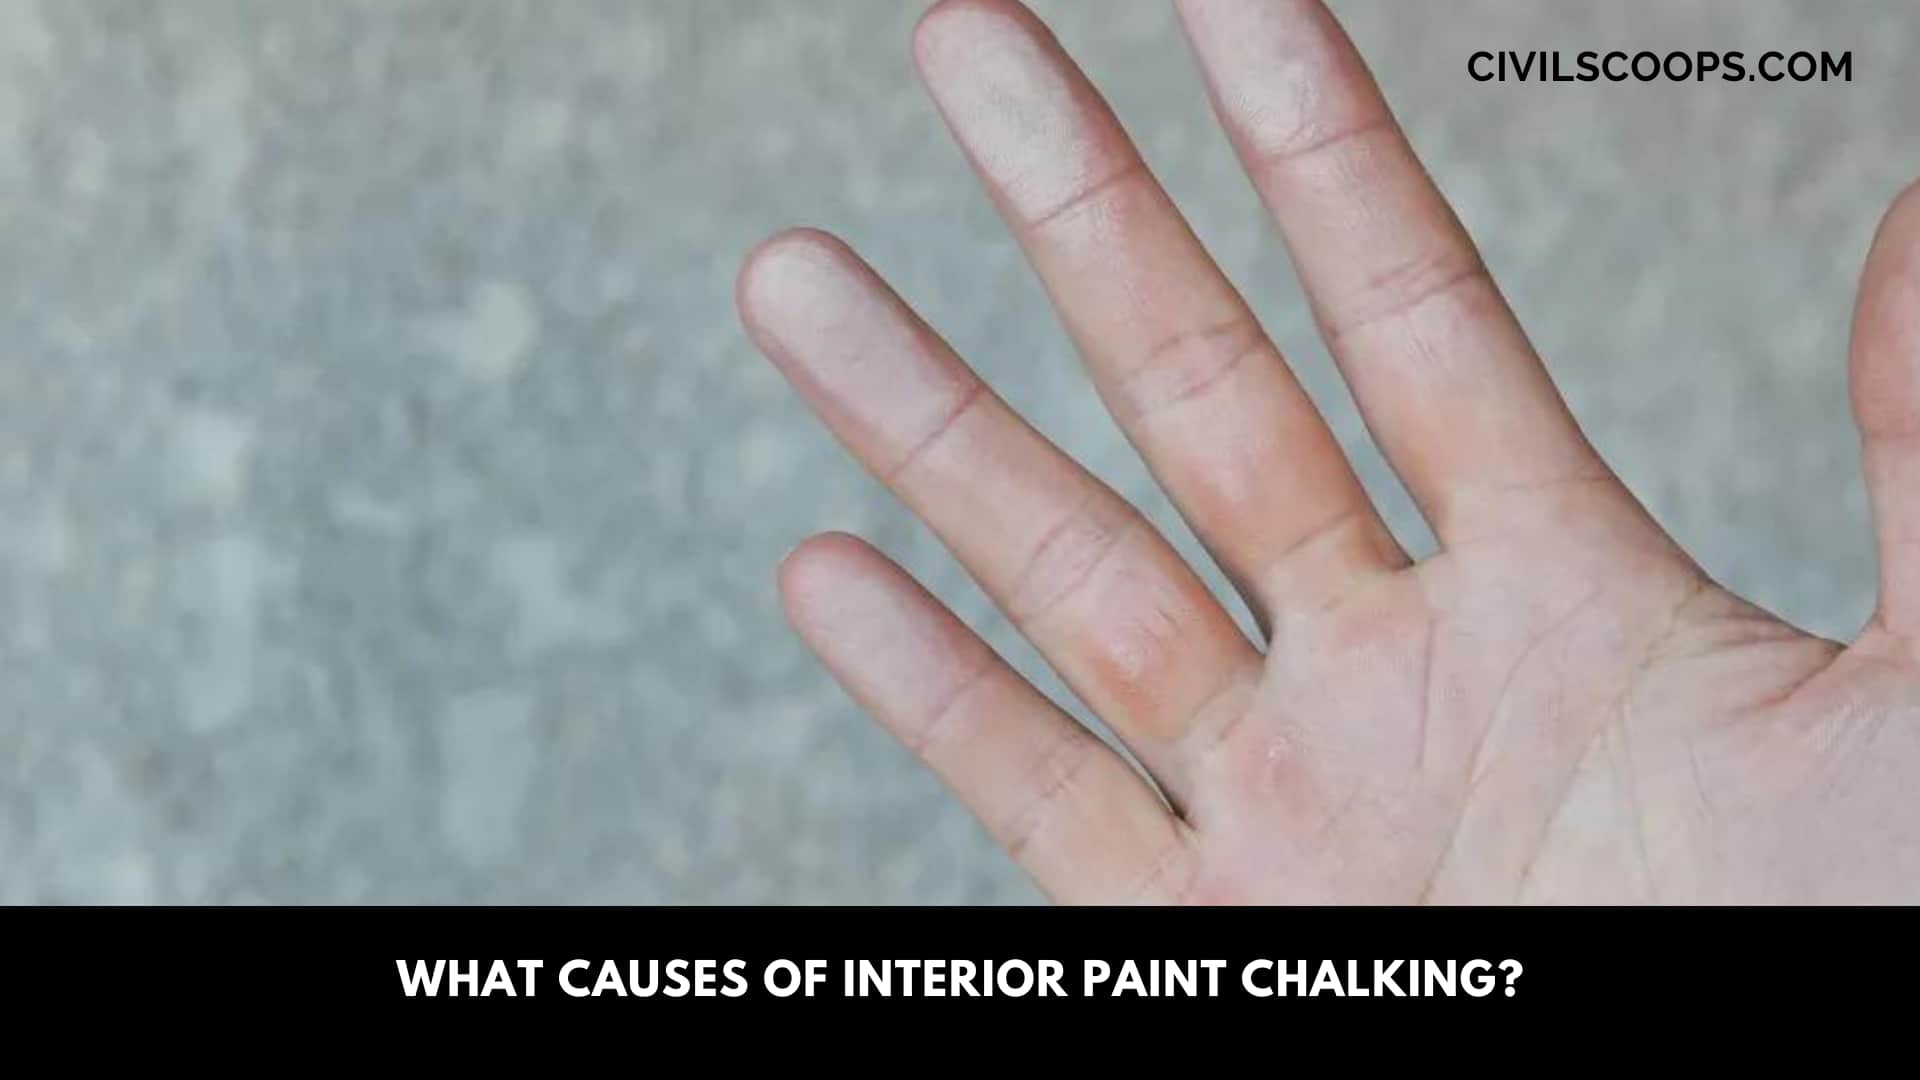 What Causes of Interior Paint Chalking?